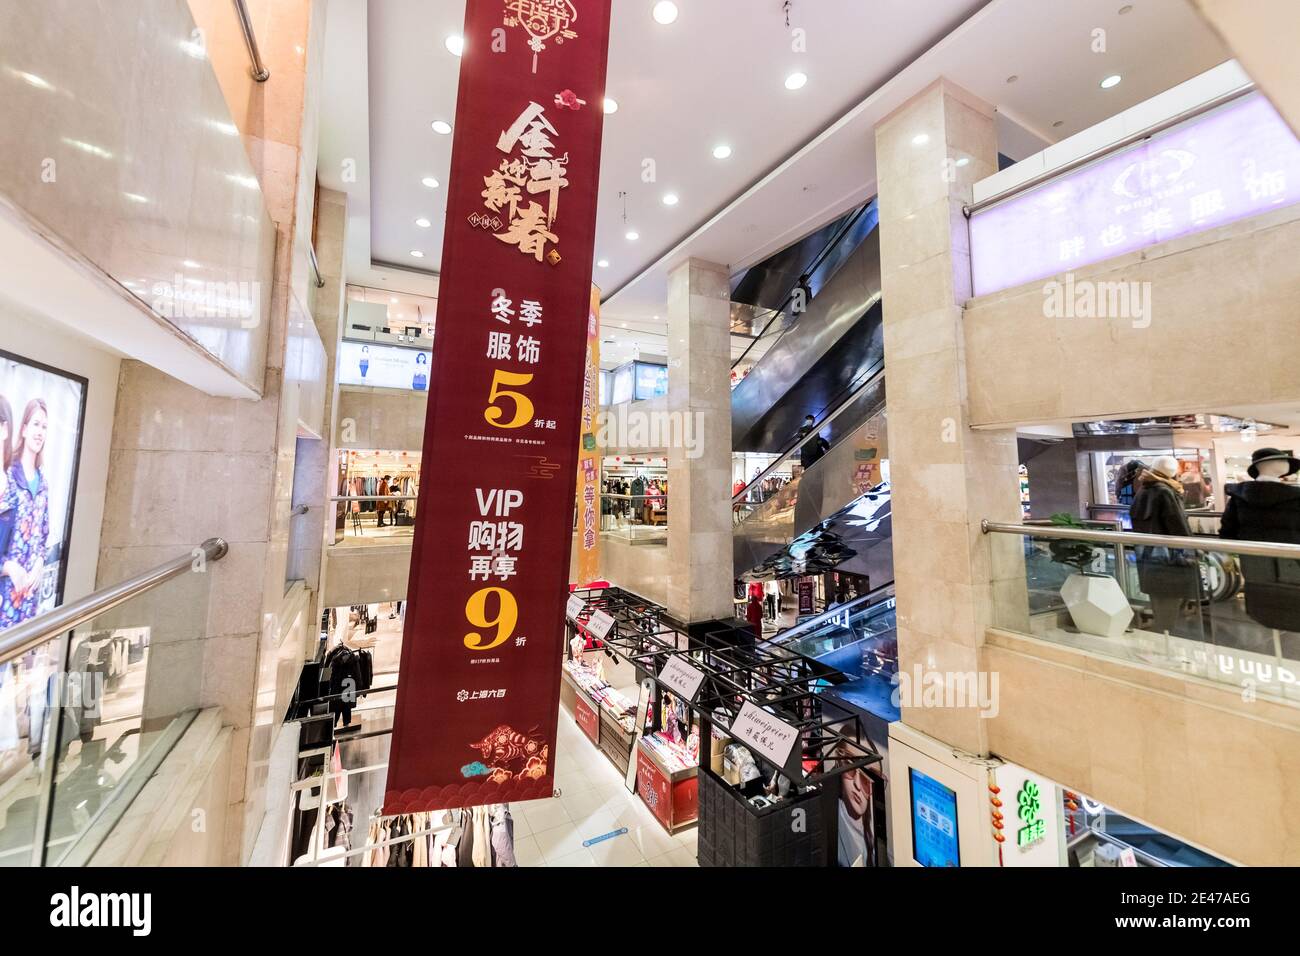 The inside view of Shanghai Liubai, a local mall with a history of 70 years, which will be rebuilt with an investment of 700 million Yuan (100 million Stock Photo